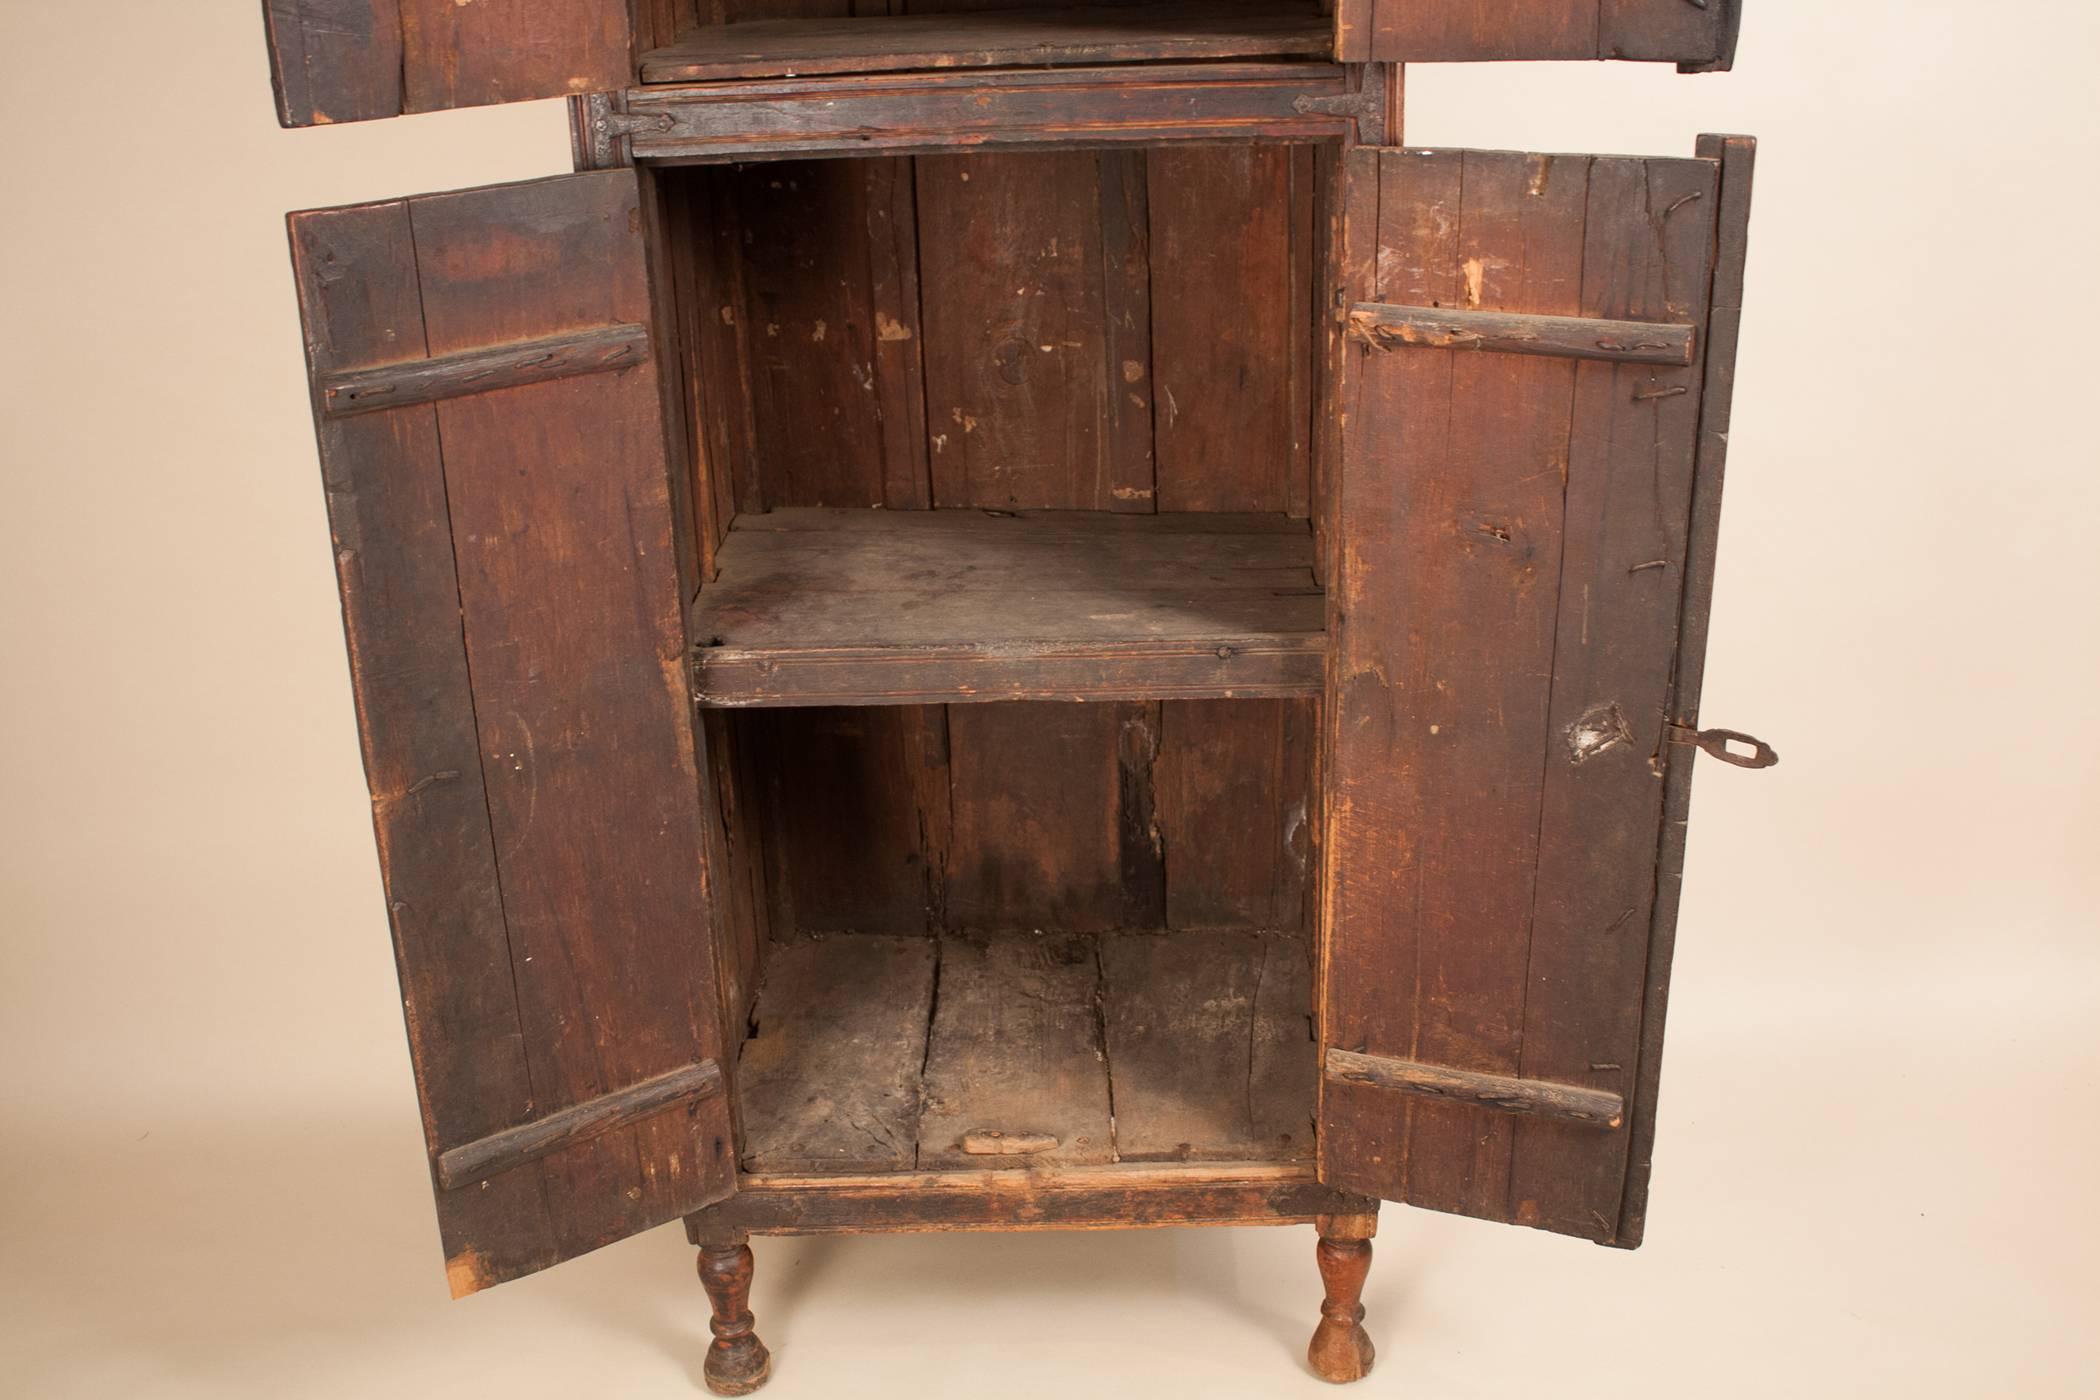 Indian Rustic Wood Cabinet from Goa, India